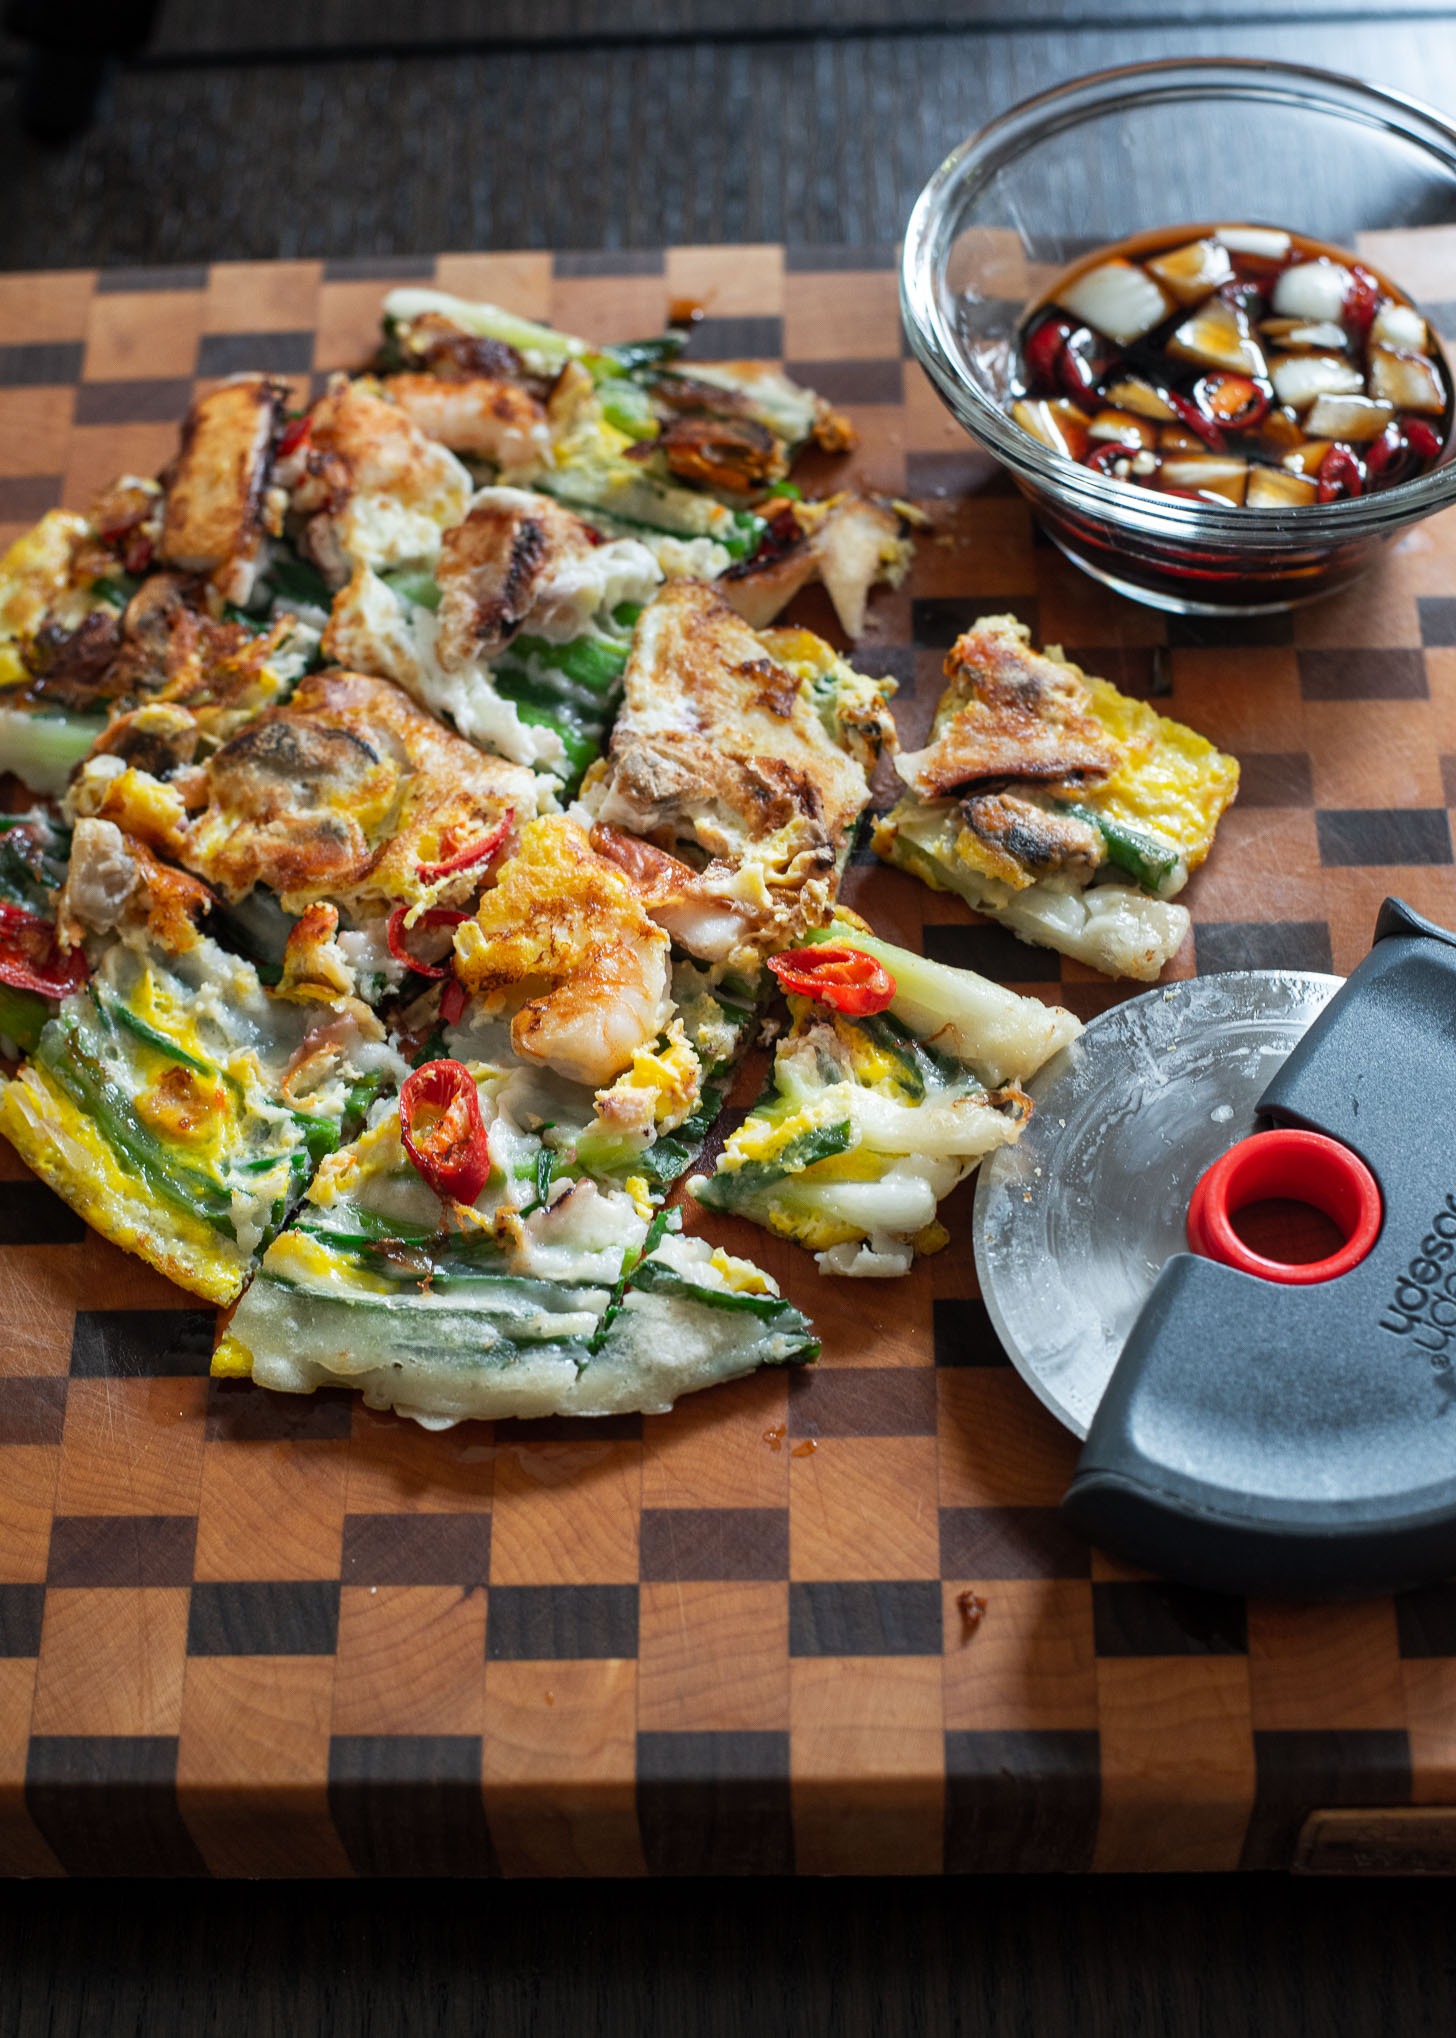 Seafood pajeon sliced into serving pieces using a pizza cutter.